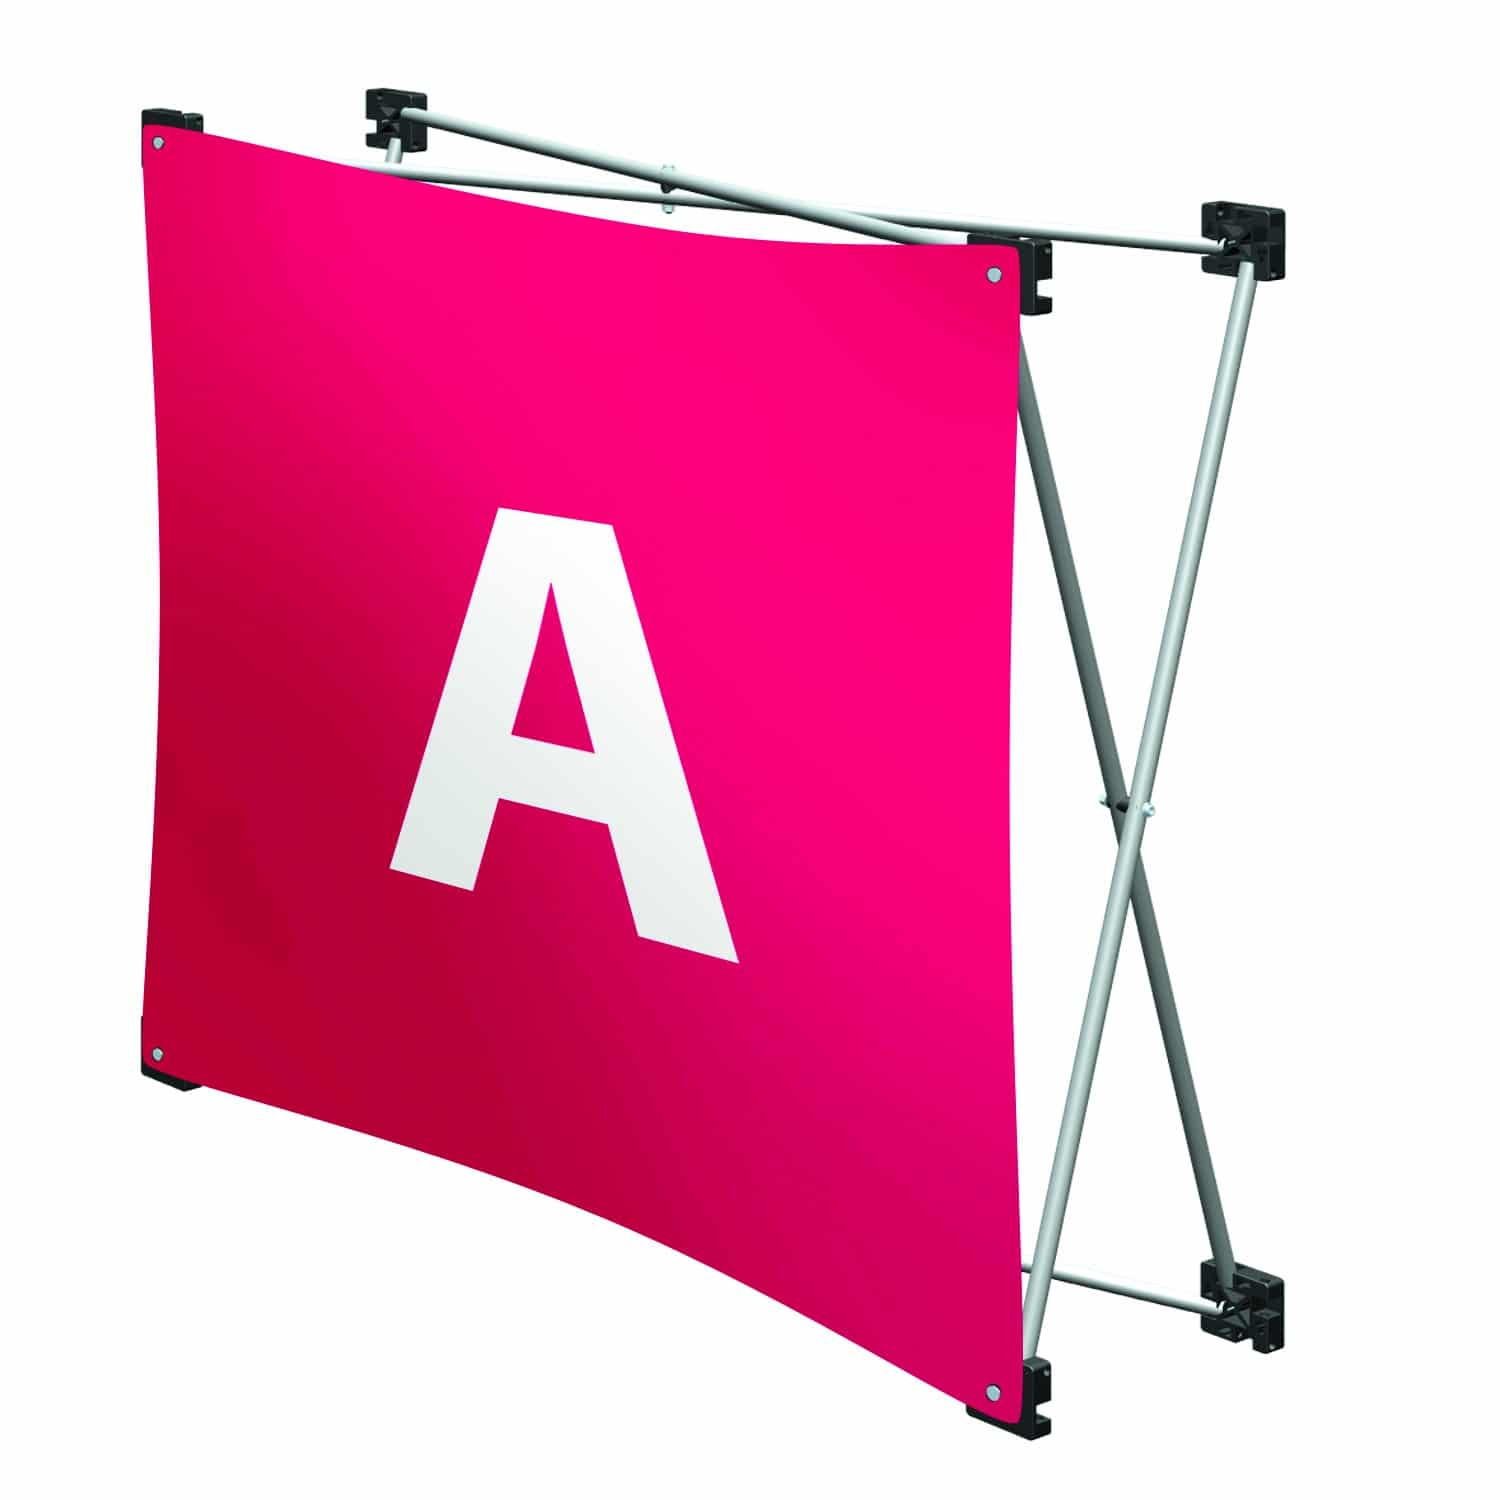 Replacement Single Quad Banner A for Micro Geometrix tabletop exhibit displays